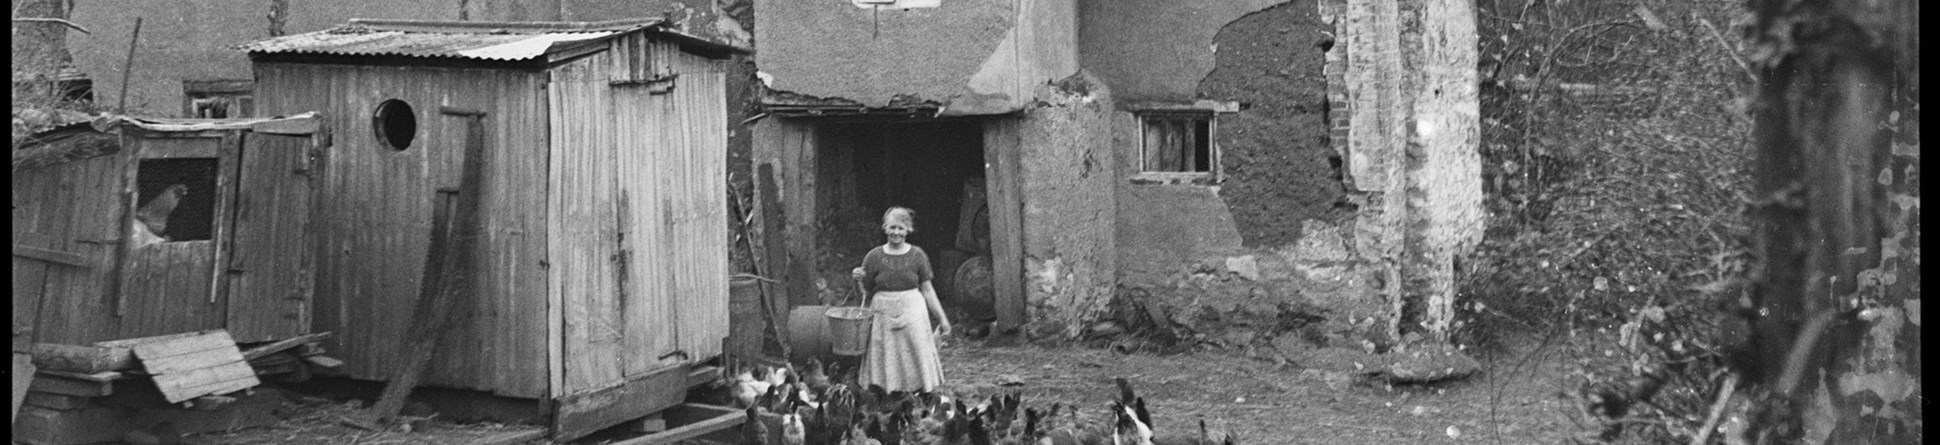 Black and white photograph of part of a rendered and thatched farmhouse. In the yard to the front, a woman holding a pail stands amongst a group of chickens. To her side is a shed or old shepherd's hut. Fields rise in the distance behind the farmhouse.